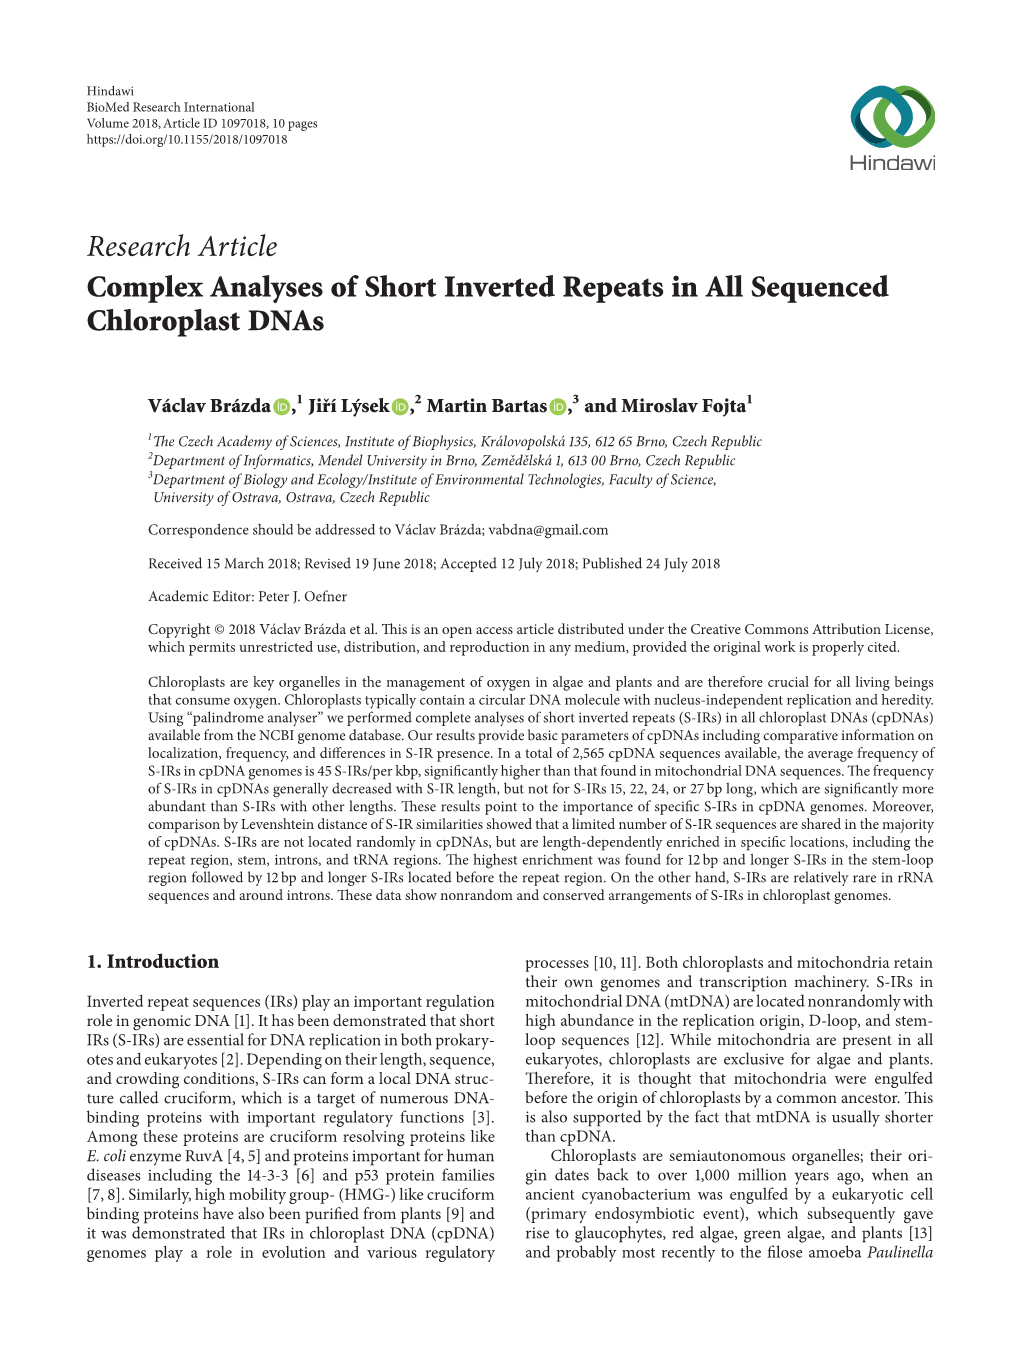 Complex Analyses of Short Inverted Repeats in All Sequenced Chloroplast Dnas